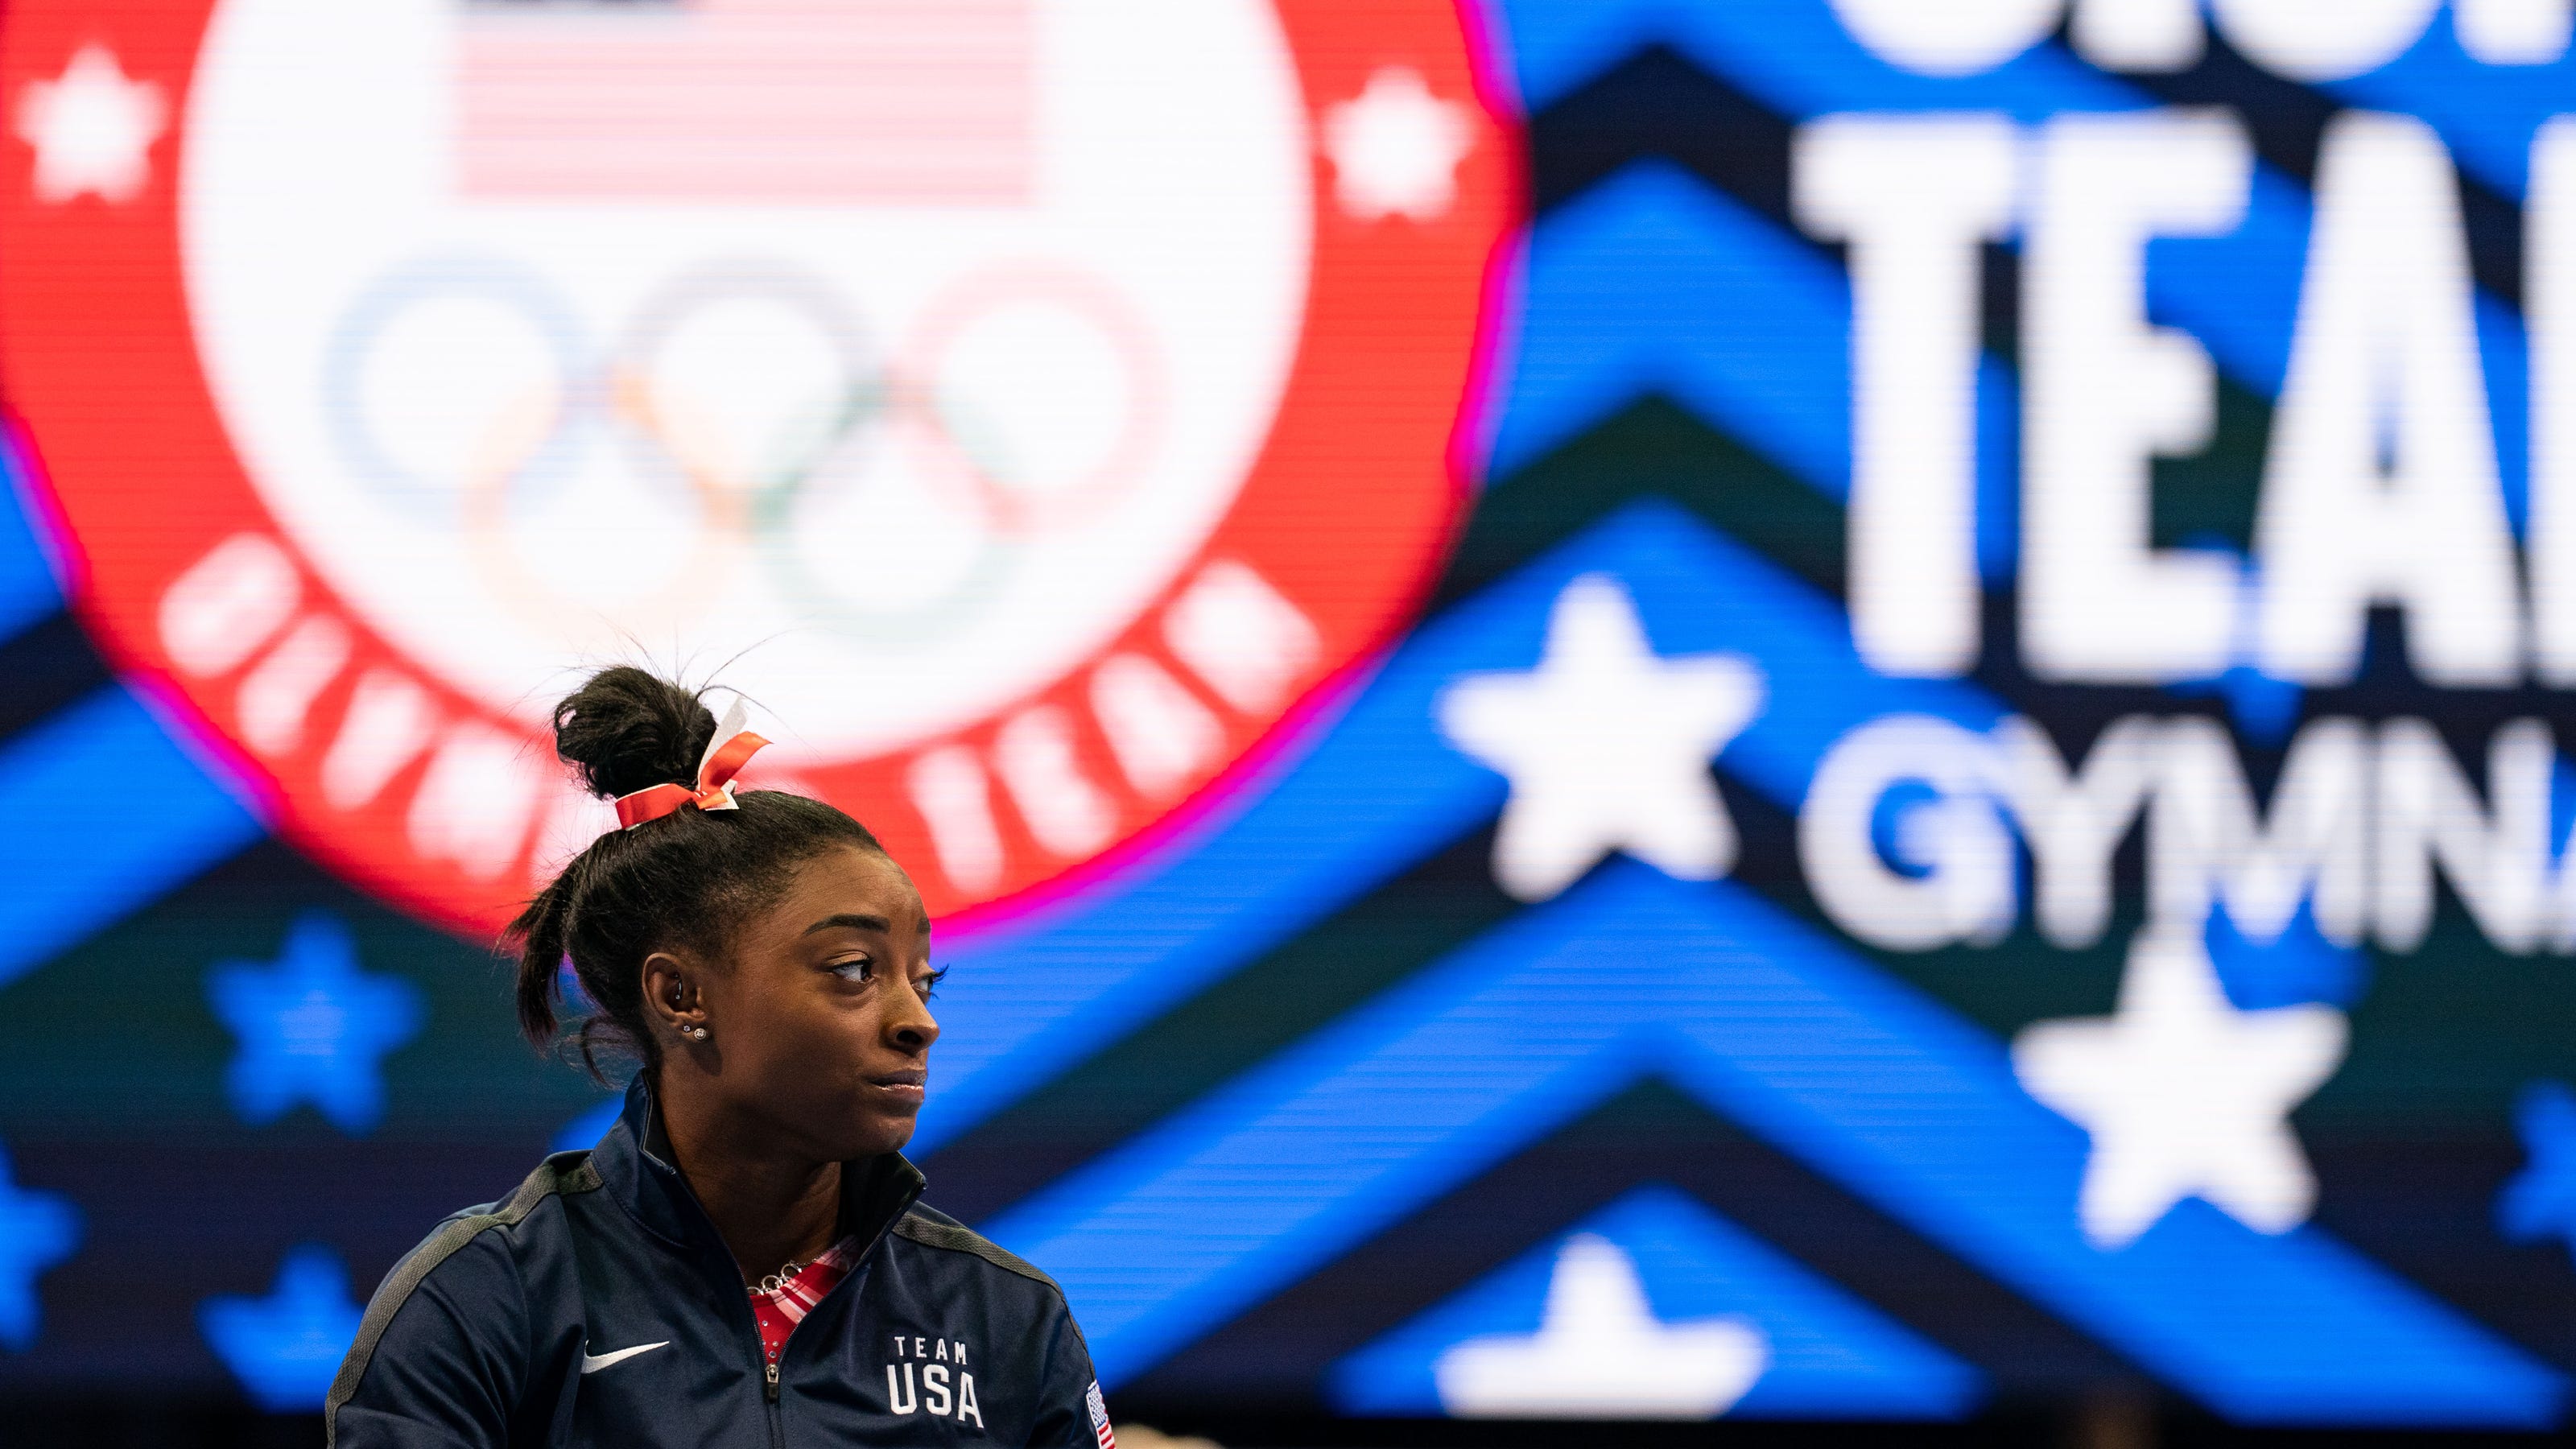 2021 US gymnastic trials: Who will join Simone Biles at Olympics?